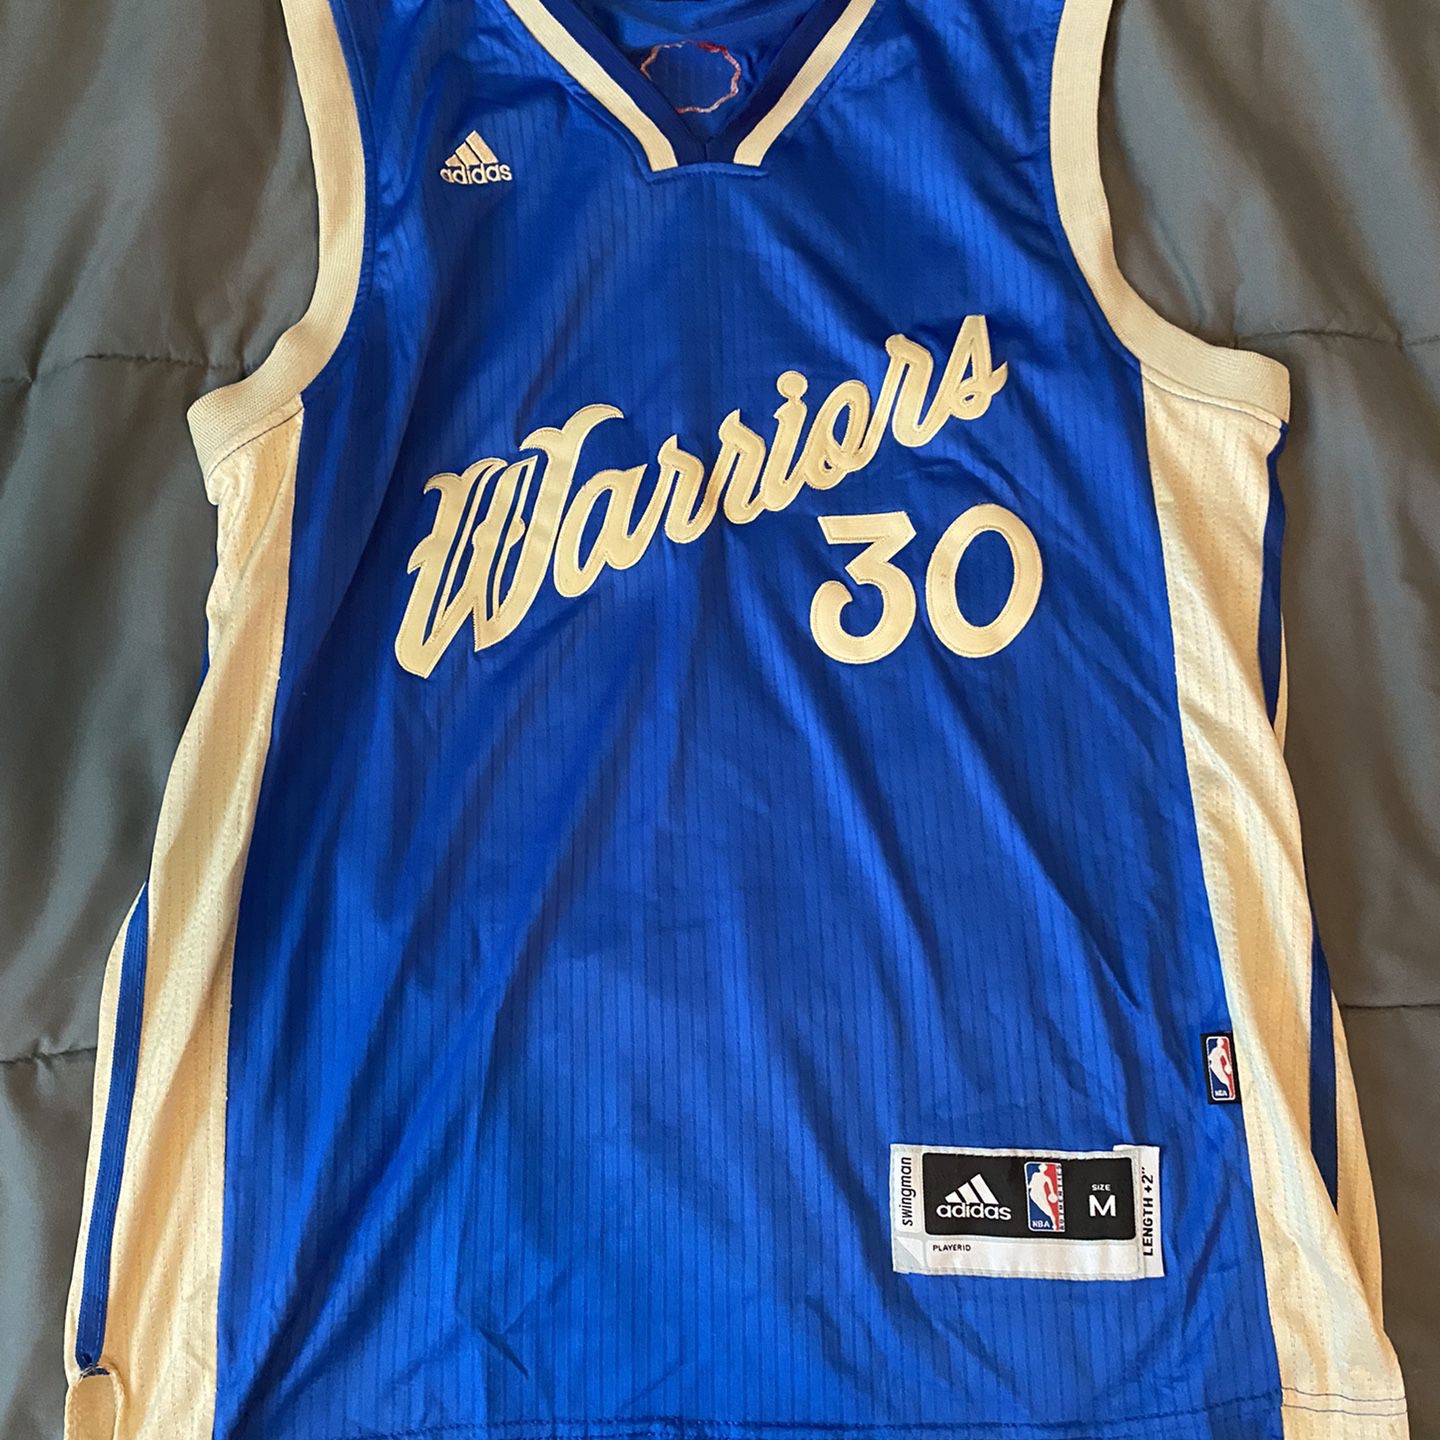 Youth Large Stephen Curry Adidas Warriors Jersey for Sale in Hernando, MS -  OfferUp